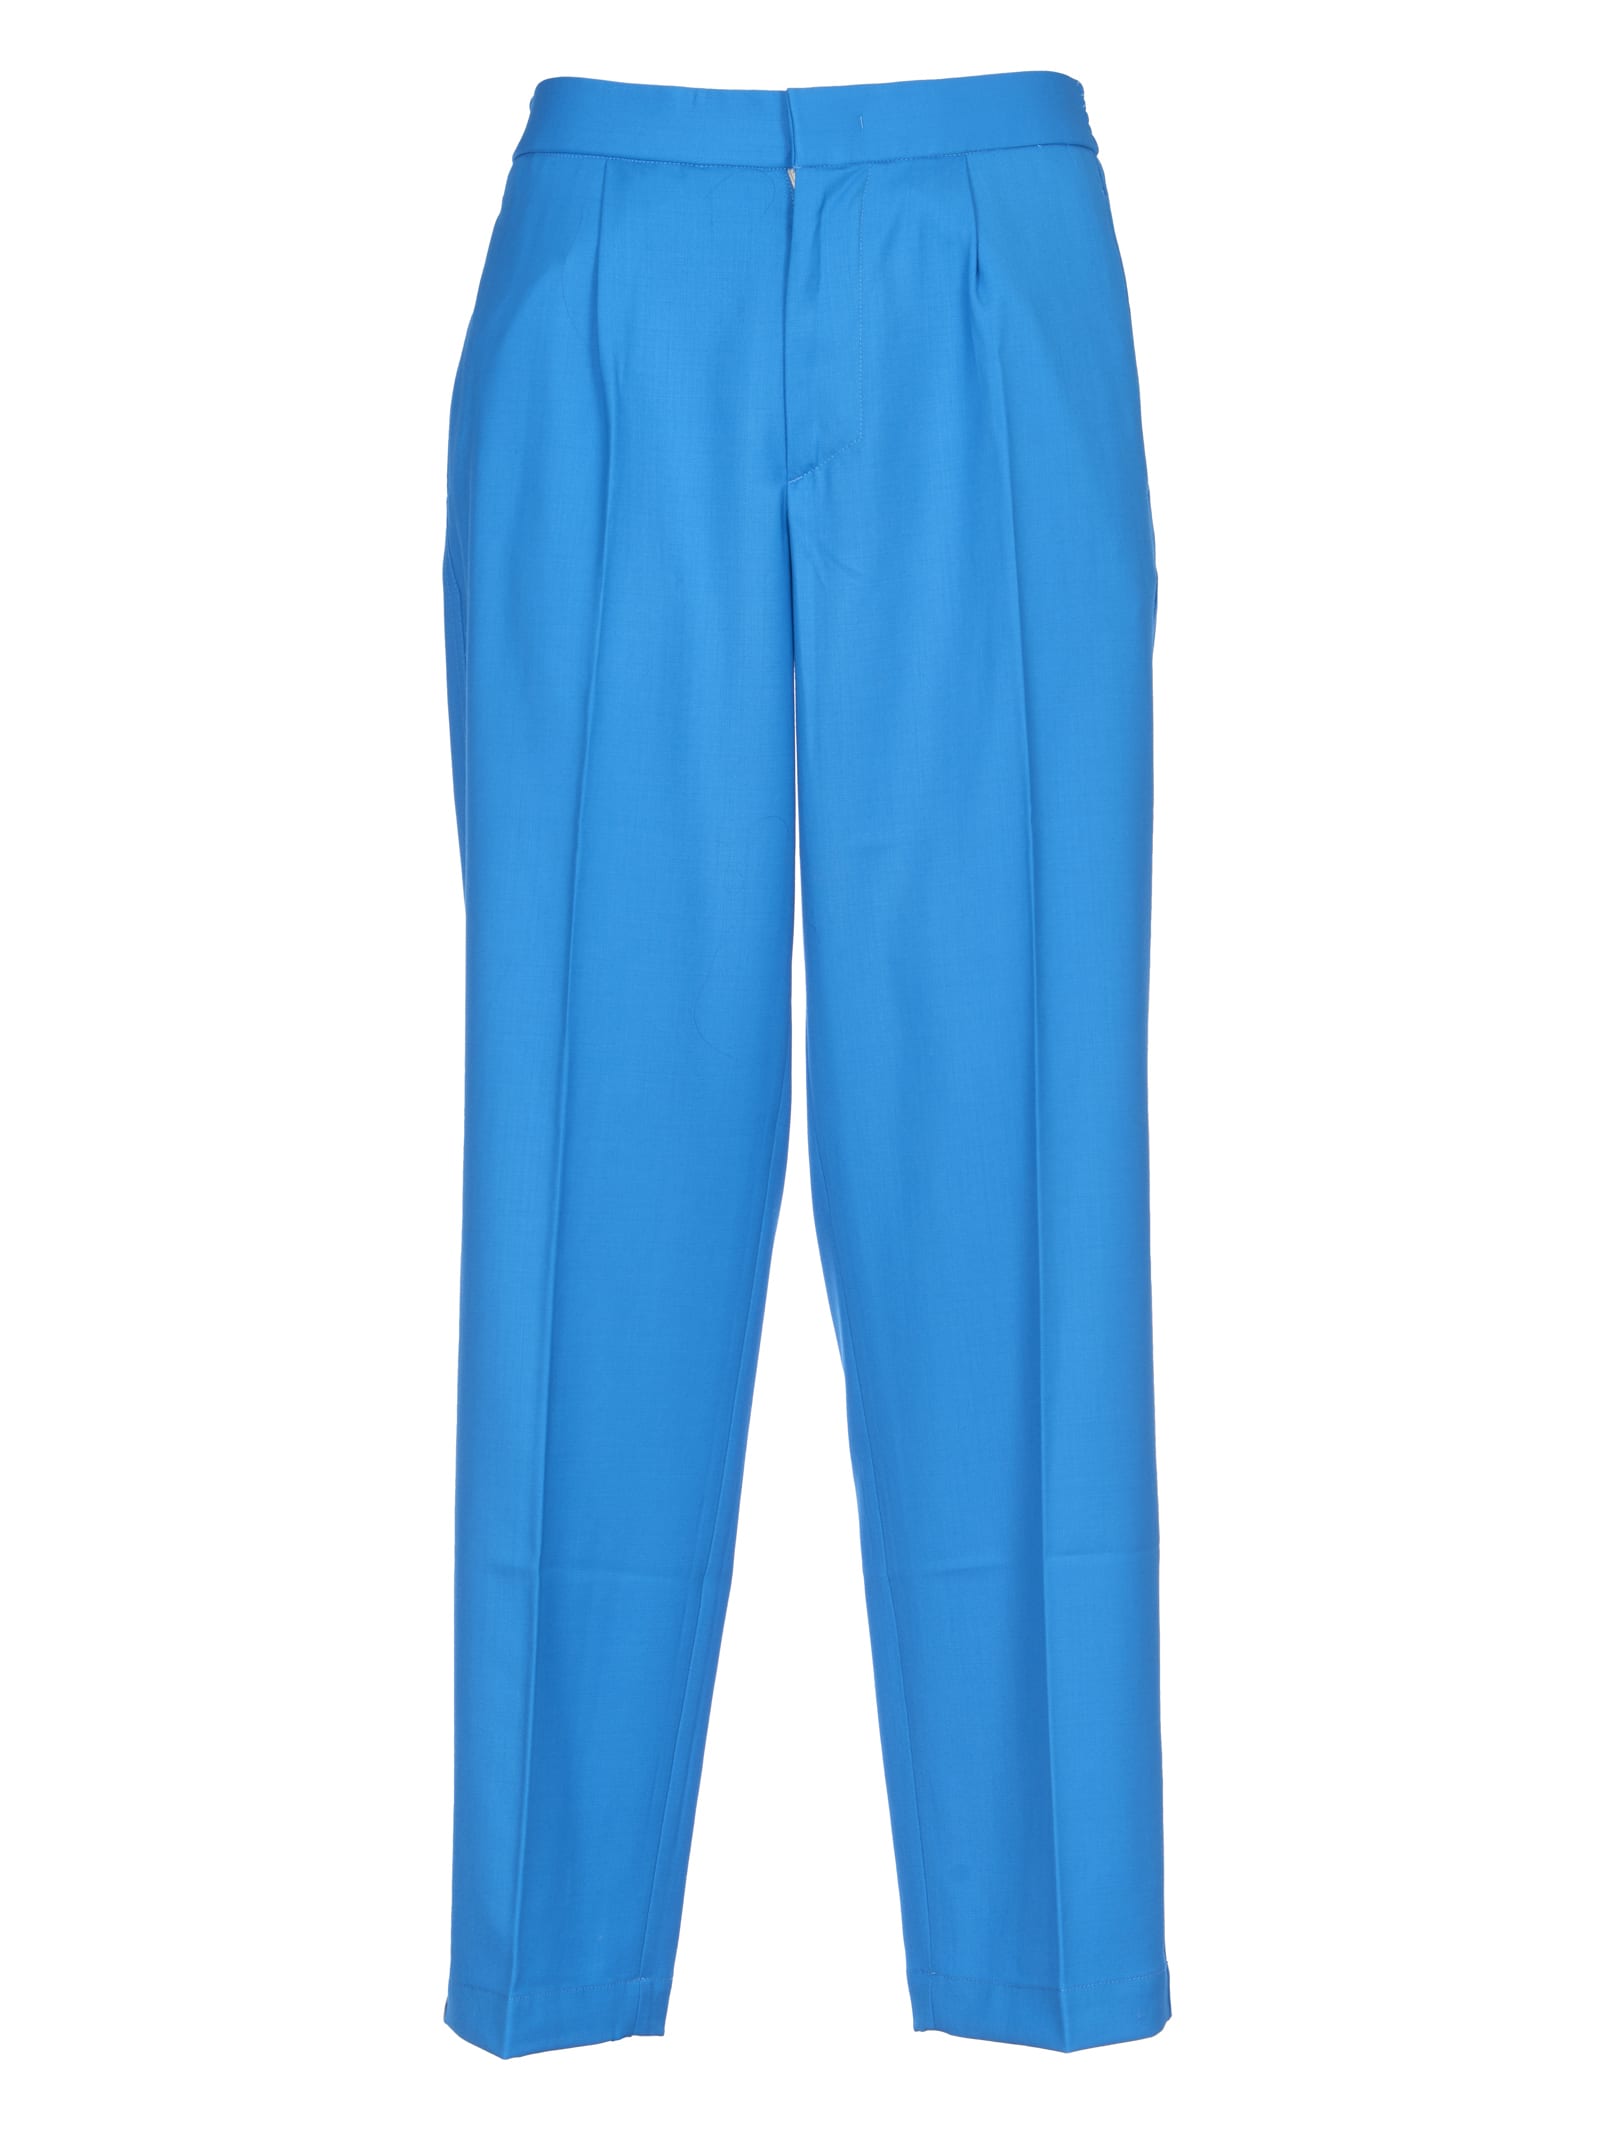 Buy AND GIRL Blue Solid Polyester Regular Fit Girls Pant | Shoppers Stop